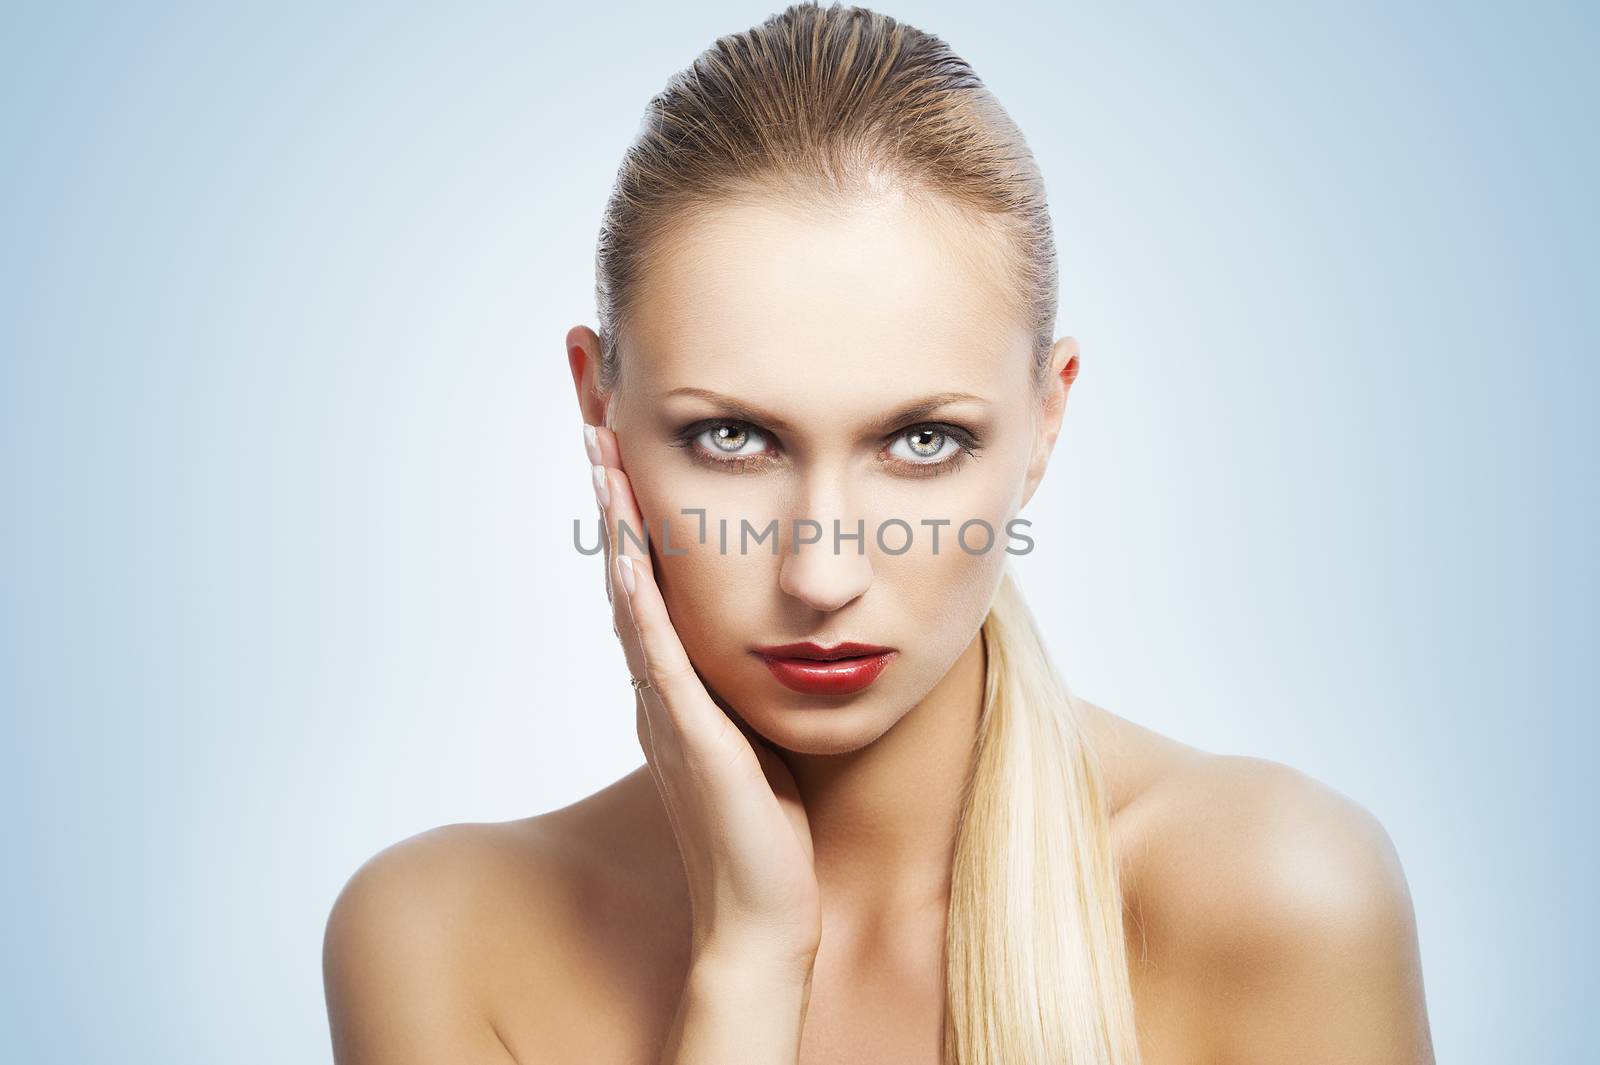 blond pretty woman in a beauty portrait with wet hair and a straight tail over shoulder. She looks in to the lens, the tail is over the left shoulder and she has a right hand near the face